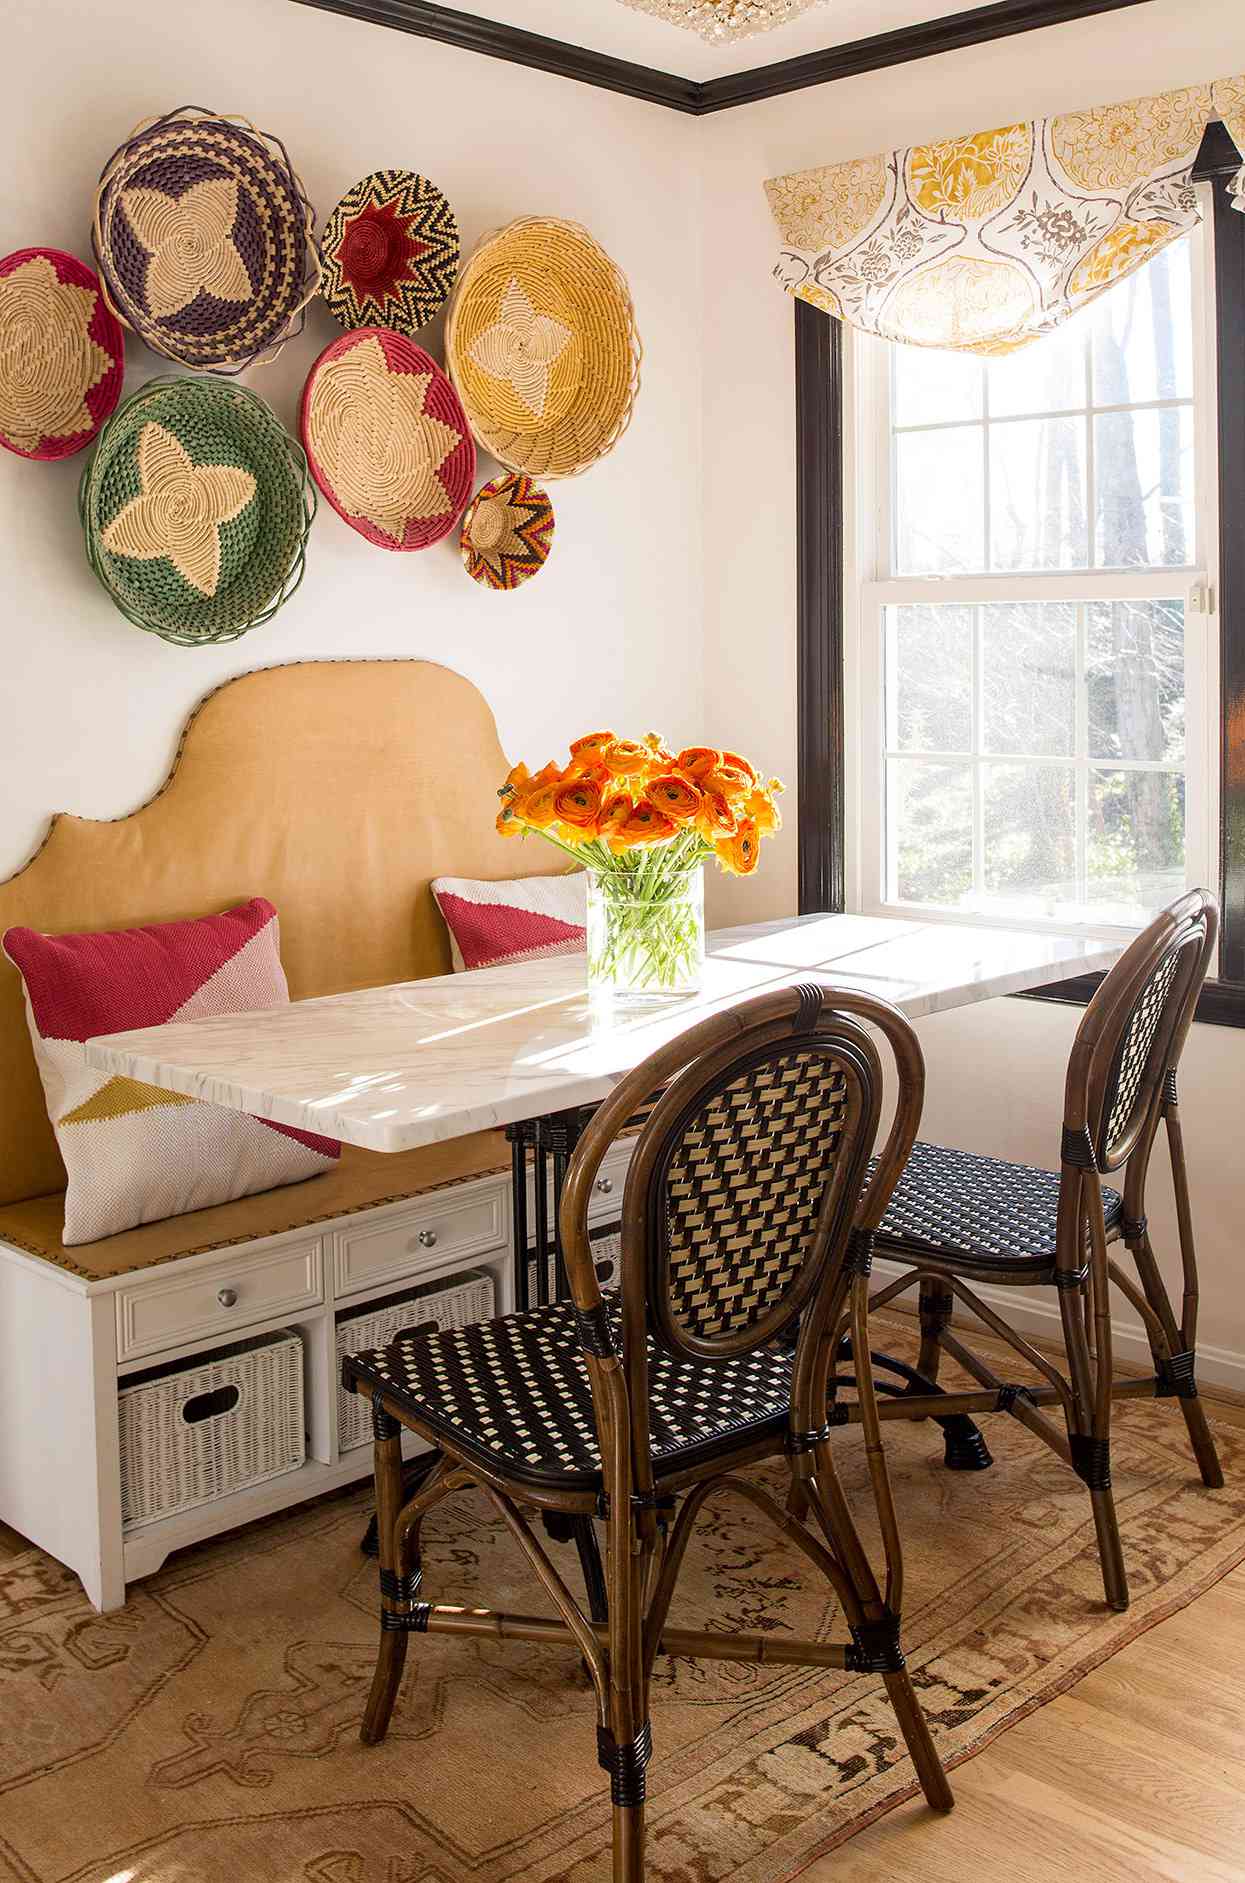 eclectic breakfast banquette with rattan chairs